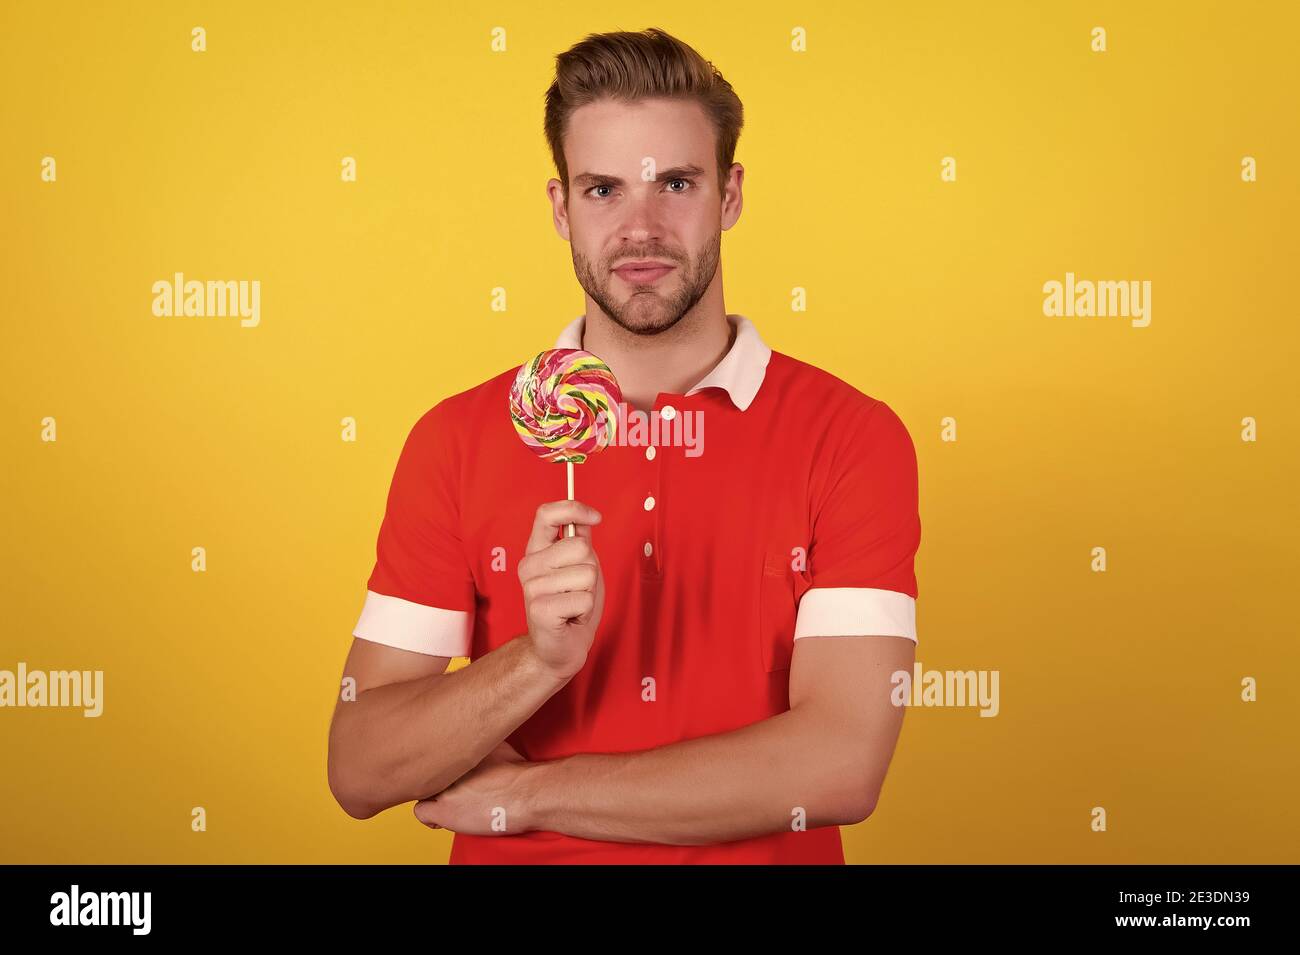 Taste the rainbow. Man candy yellow background. Handsome guy hold candy on stick. Candy shop. Lollipop or sucker. Sugary treat. Candy factory and confectionary. Stock Photo